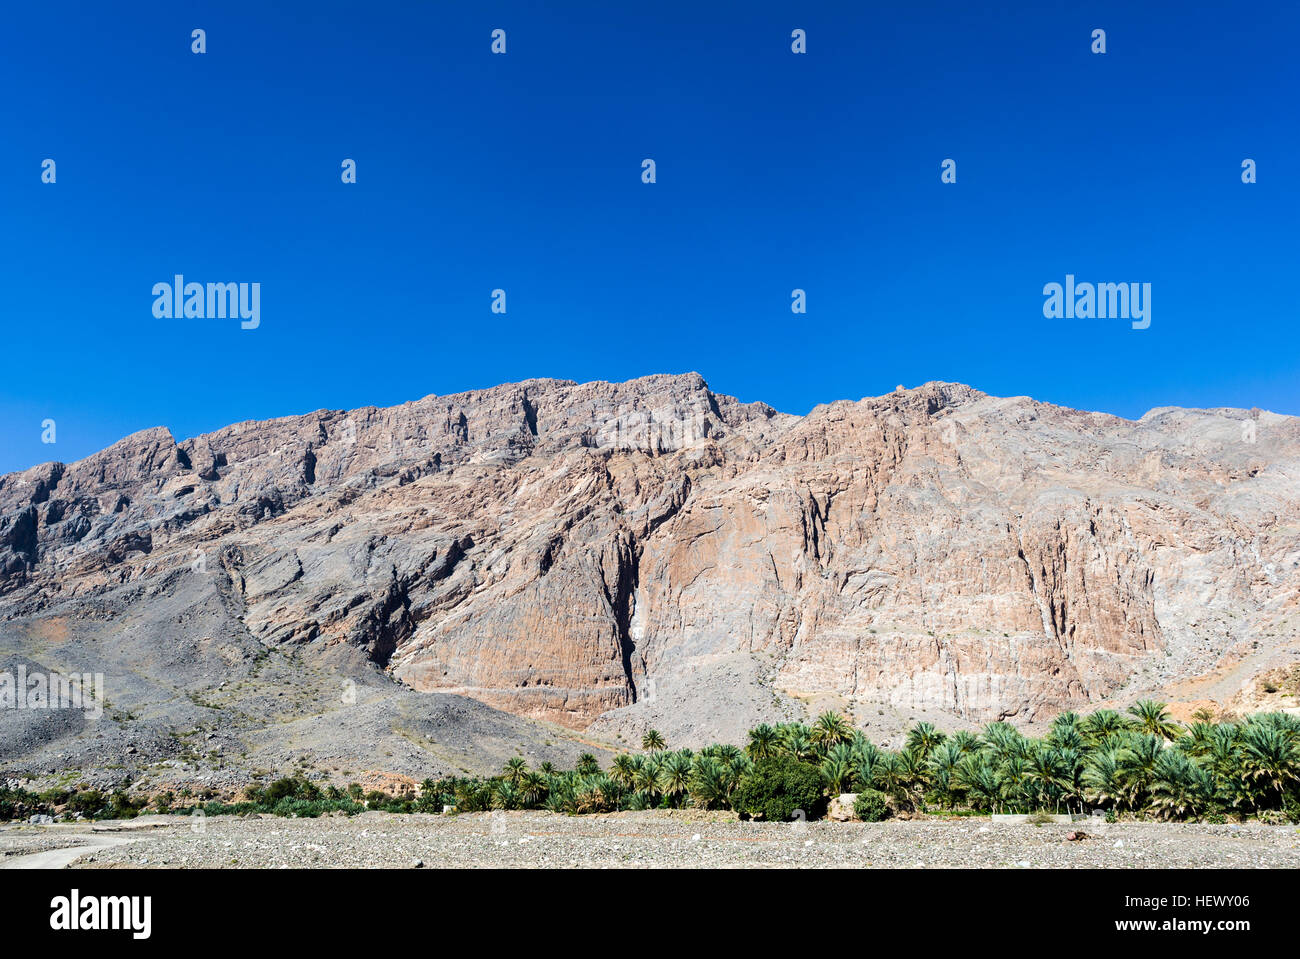 Palm trees follow the course of a river as it winds it's way along the base of a desert mountain. Stock Photo